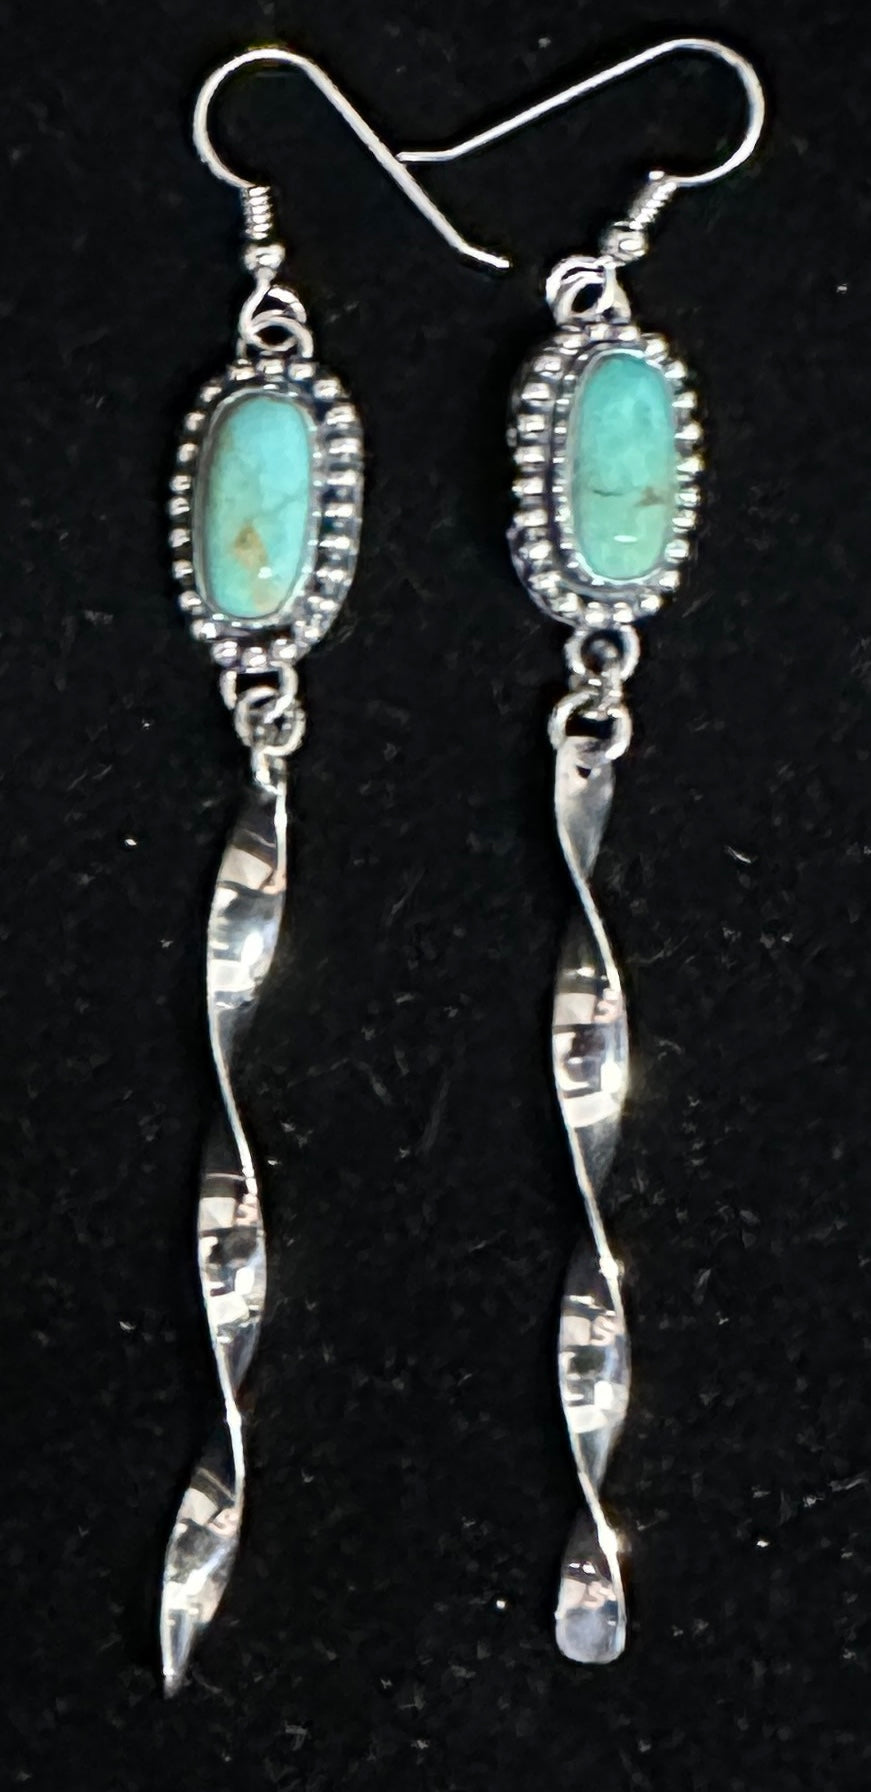 Turquoise Sterling Silver Icicle Earrings